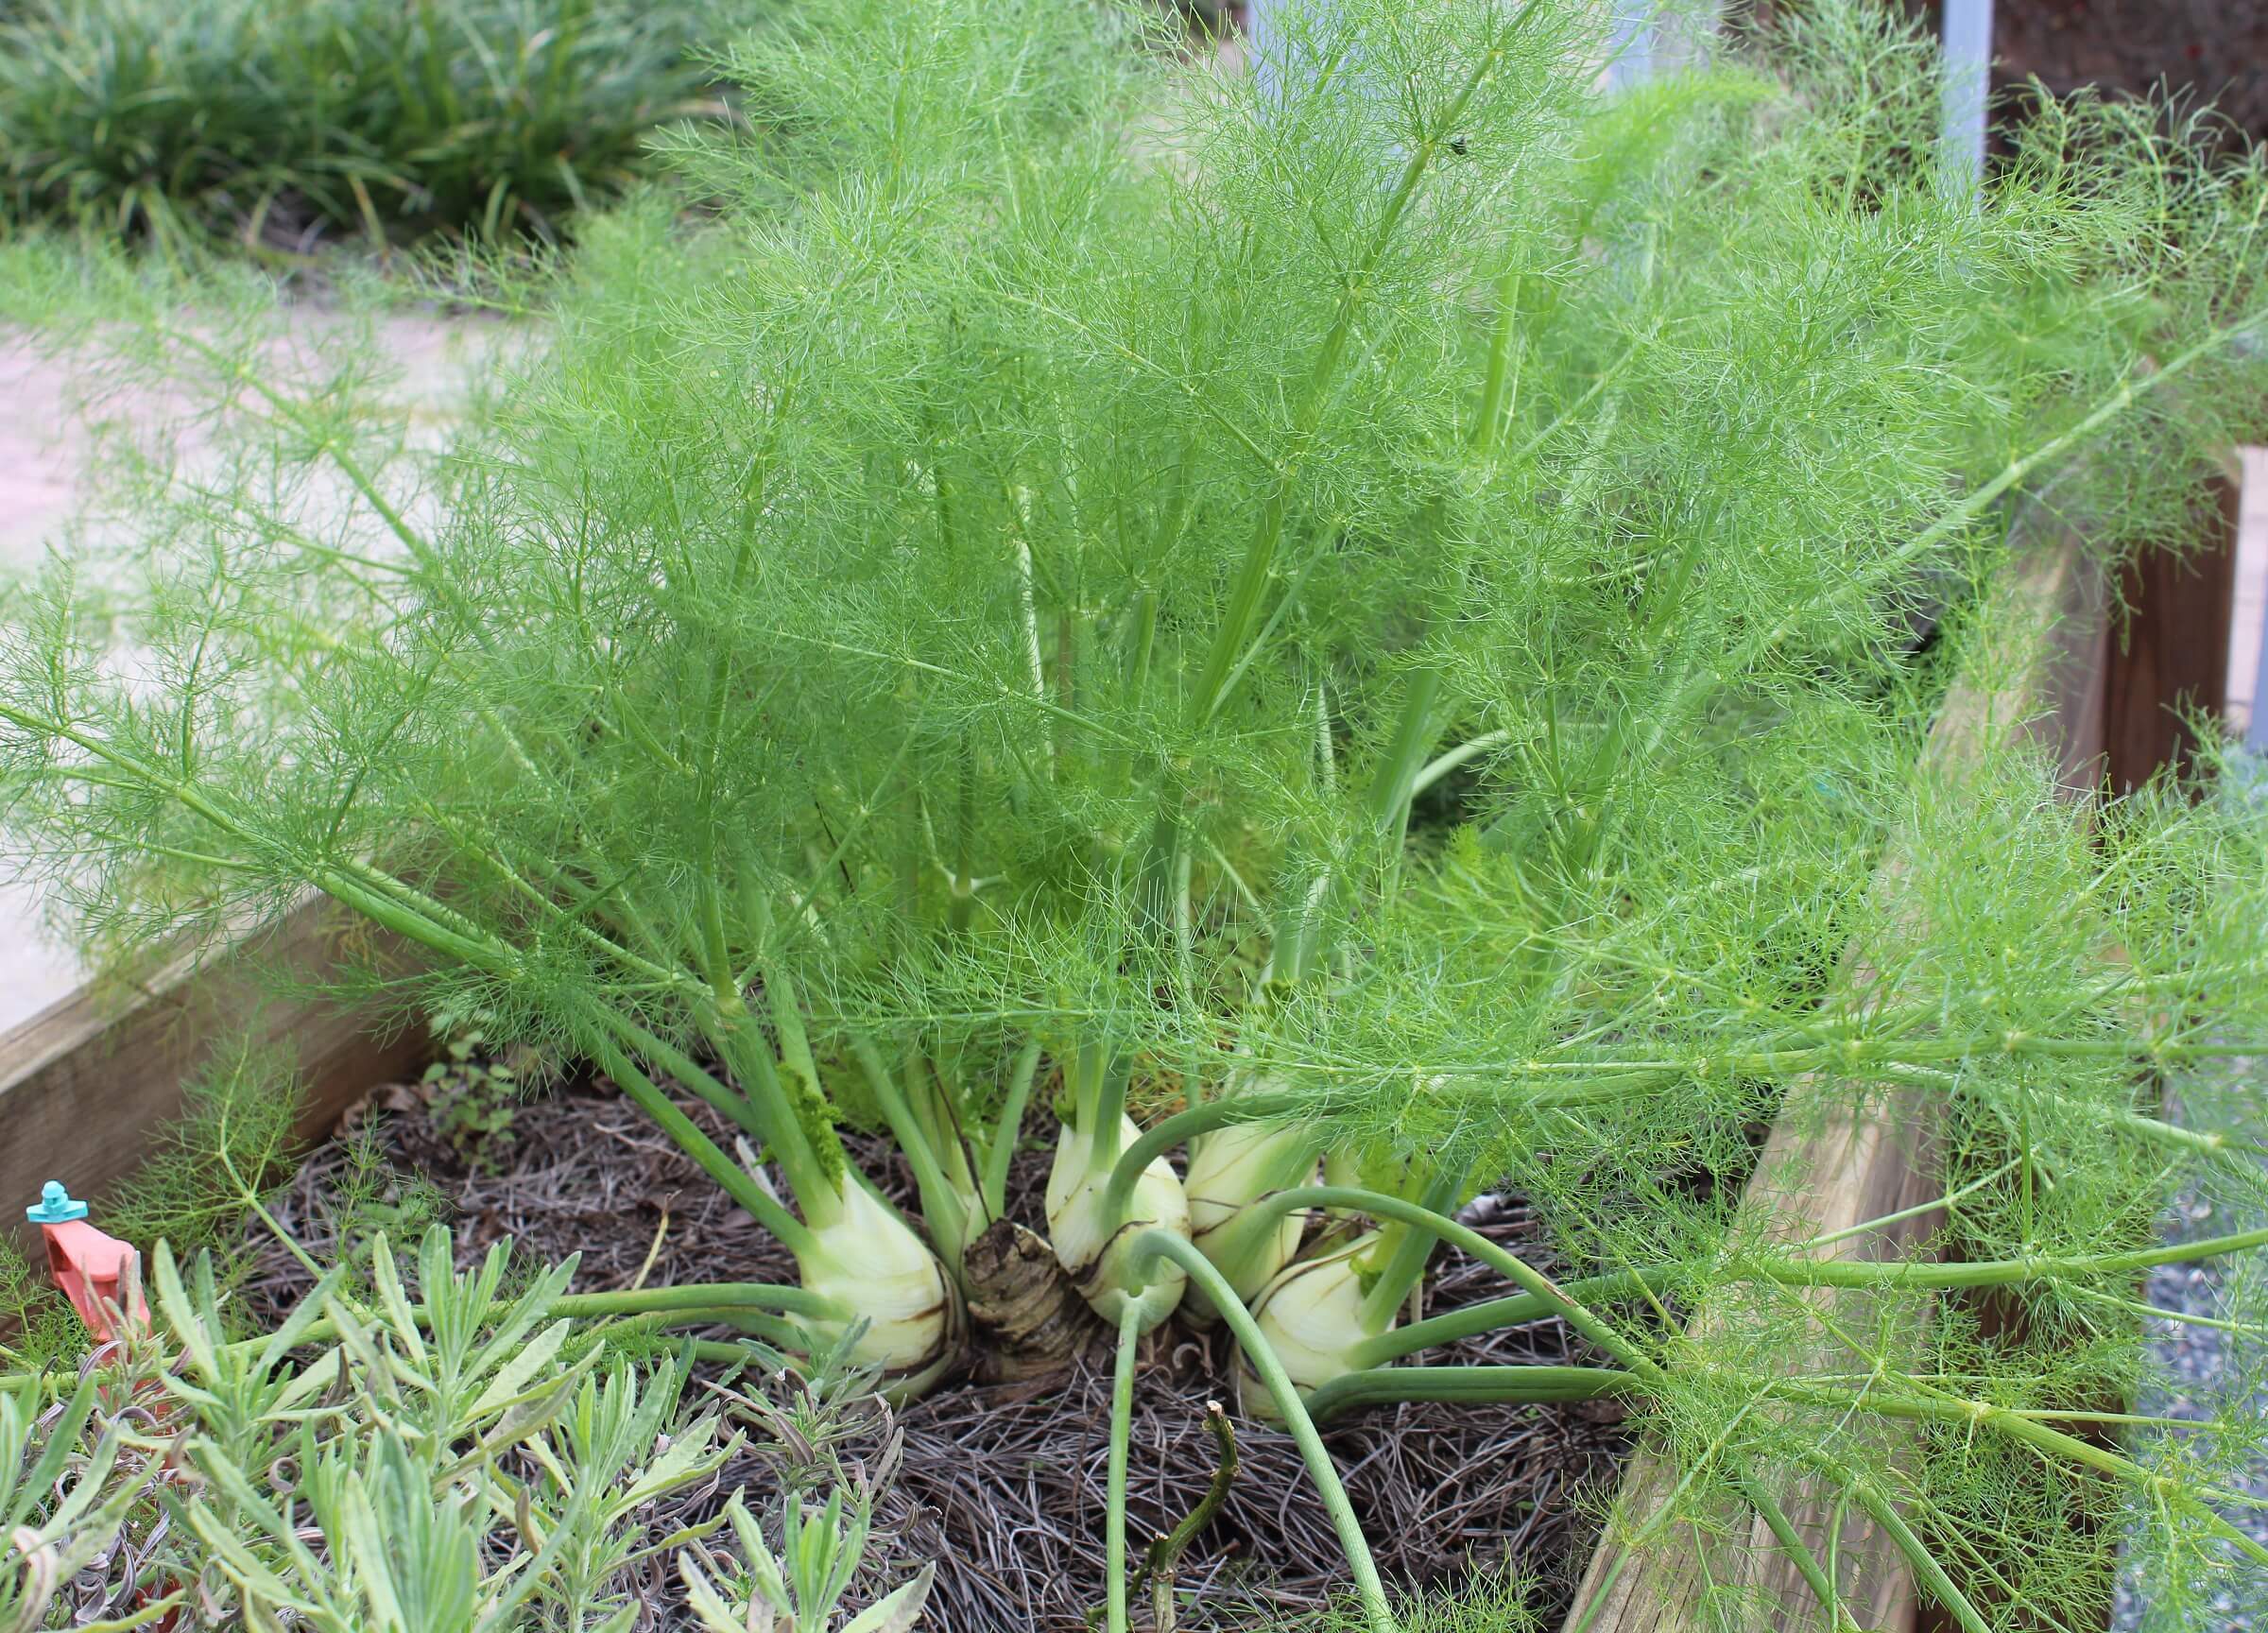 Fennel is an easy to grow herb in both traditional vegetable gardens and in the landscape. Both the leaves and bulb are used to flavor winter soups and roasts.